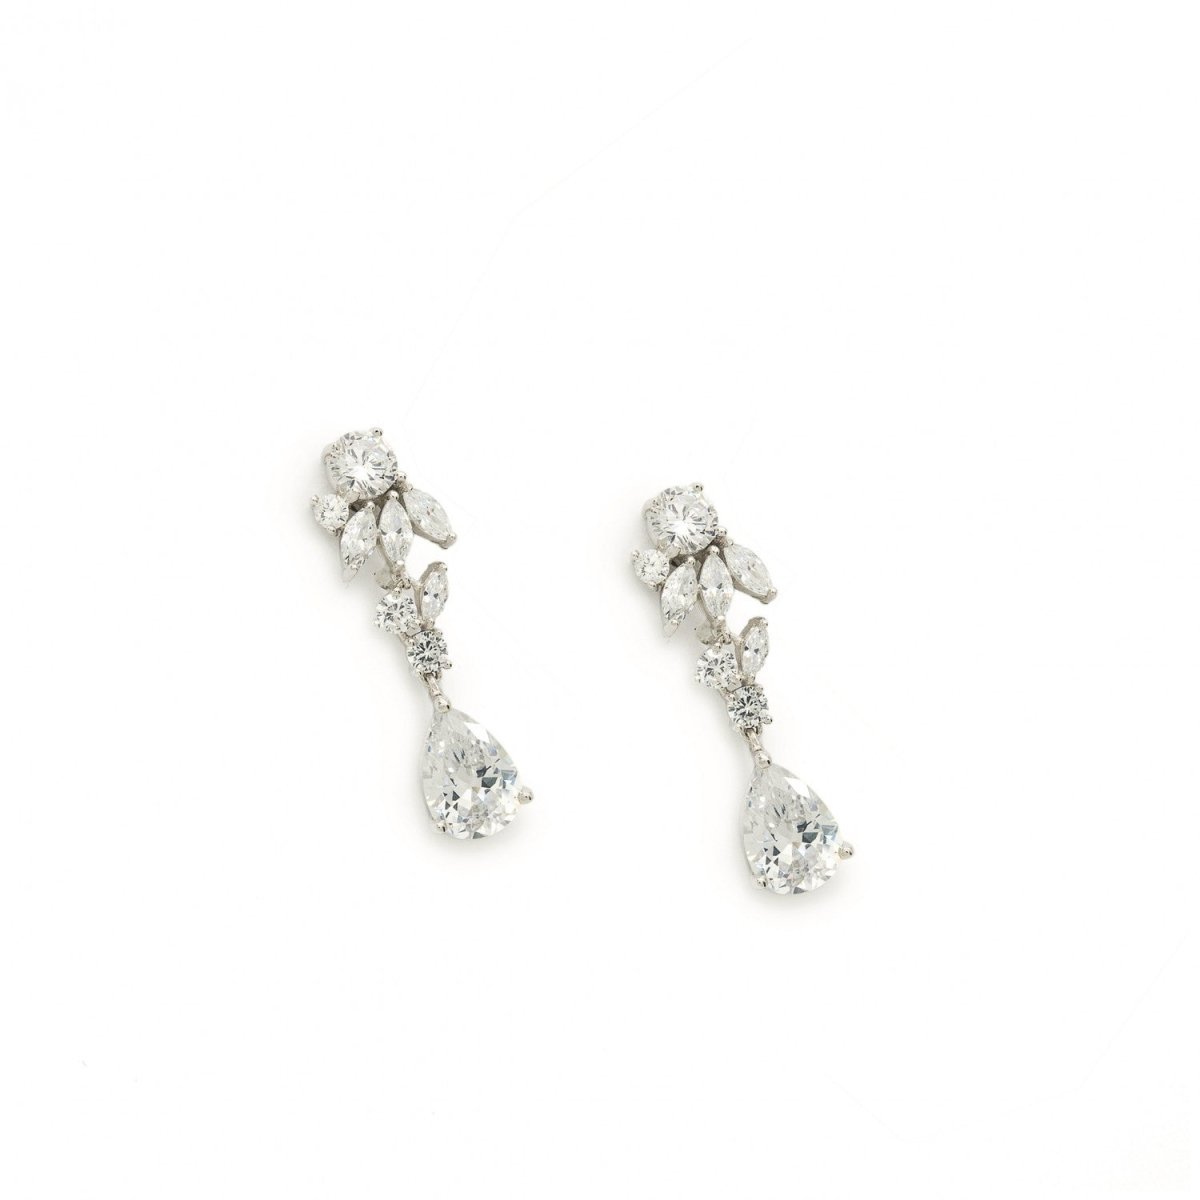 Small bridal earrings floral design with zircons - LINEARGENT